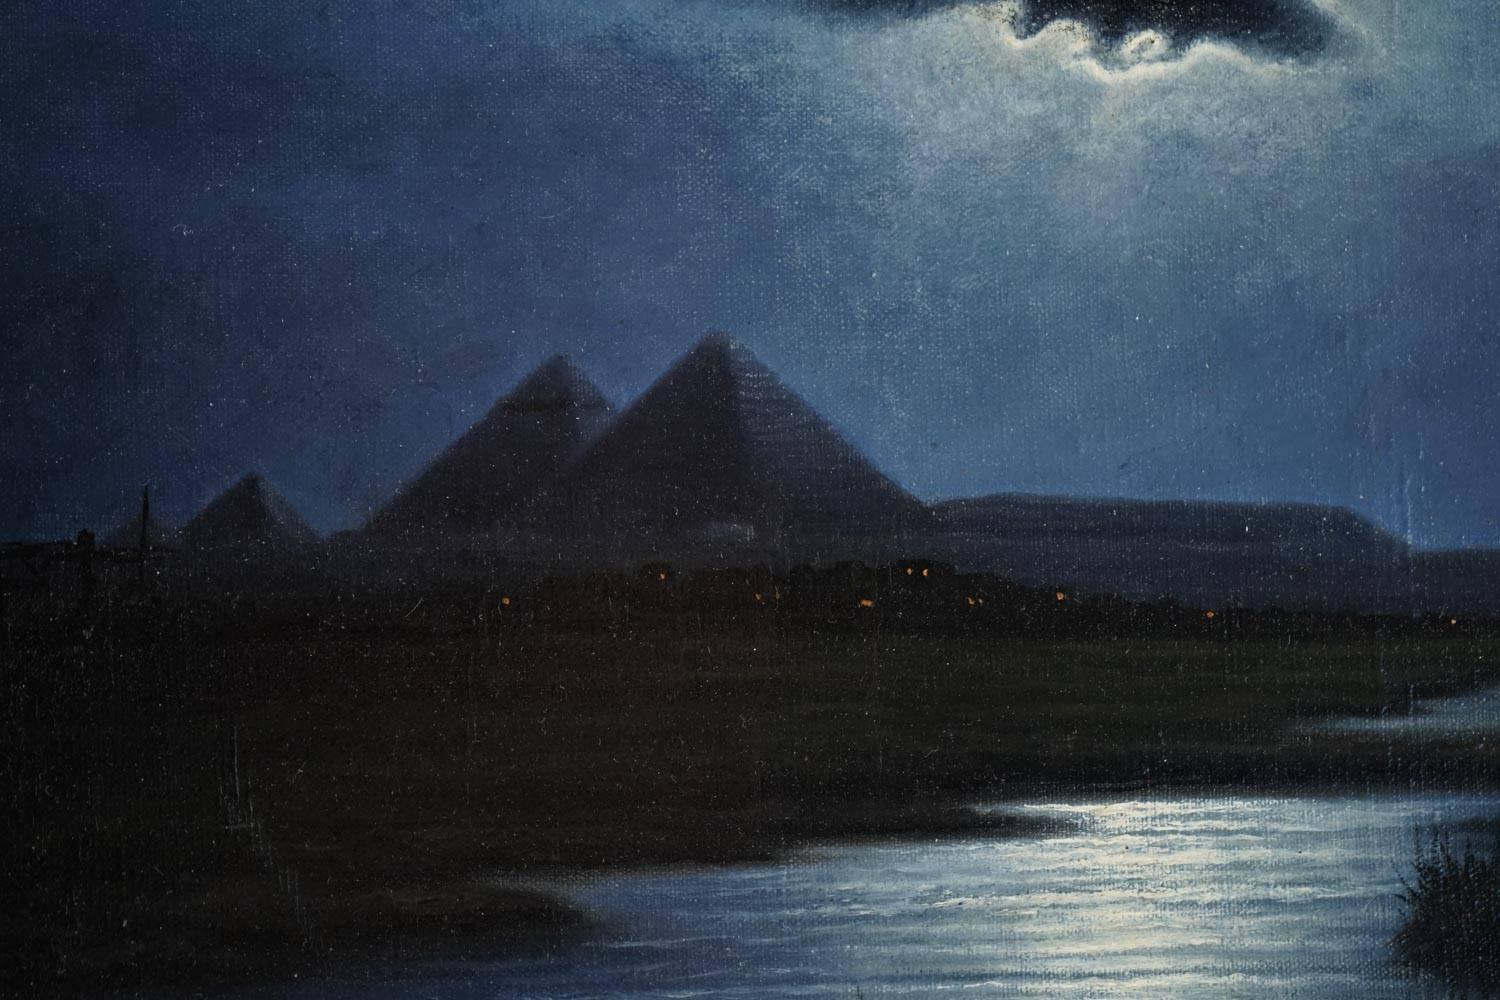 Painting in Oil on Canvas of Chimchidjam Haig, Le Caire, the Pyramids 1